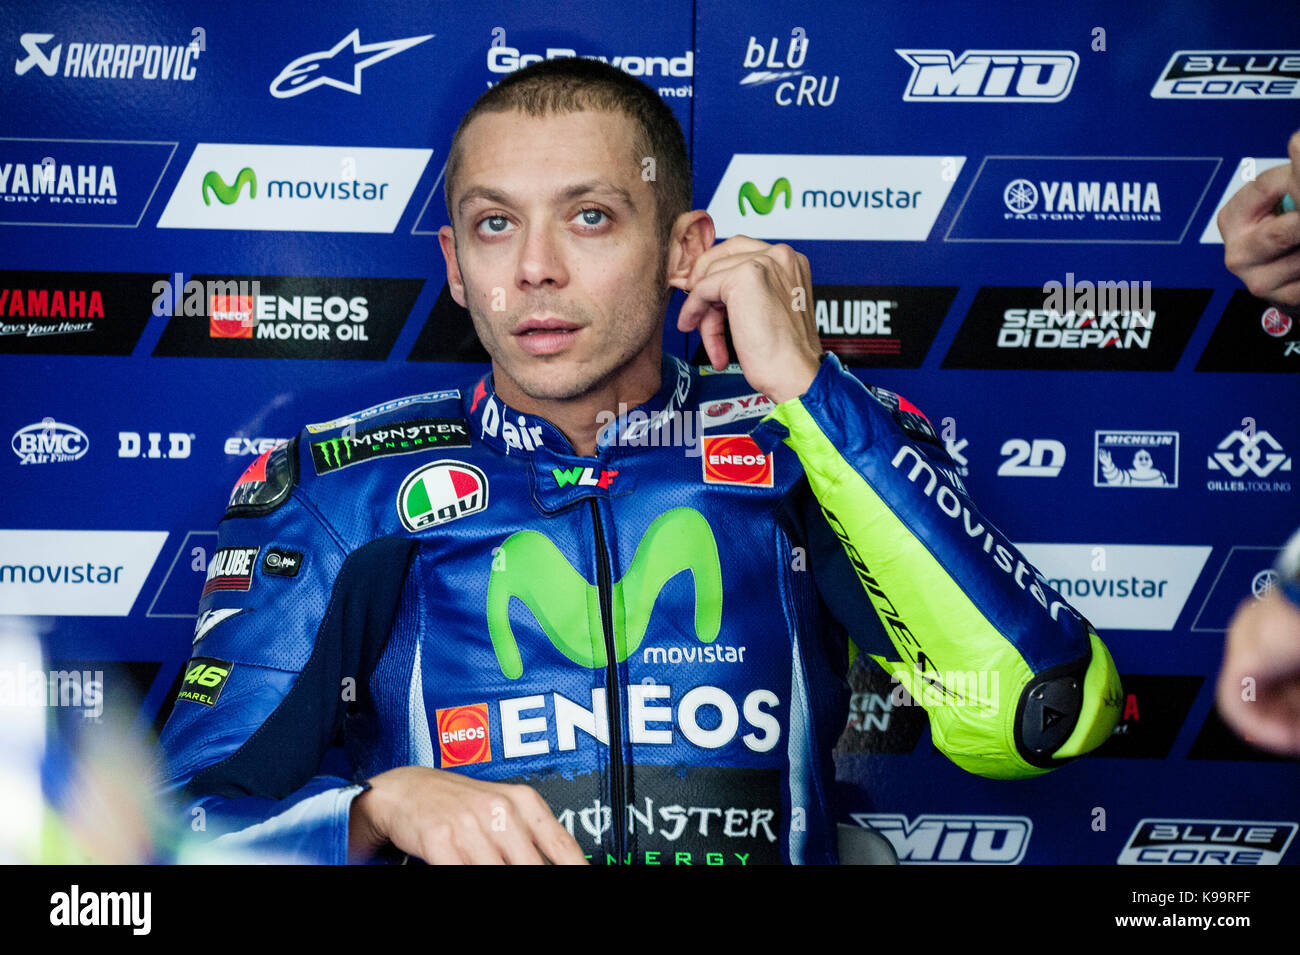 Aragon, Spain. 22 September, 2017. Valentino Rossi; of the Movistar Yamaha Motogp Team rest in the garage during the Aragon Friday free practice of Motogp. Today is the first practice day after suffering leg fractures in a serious motocross crash Credit: Pablo Guillen/Alamy Live News Stock Photo